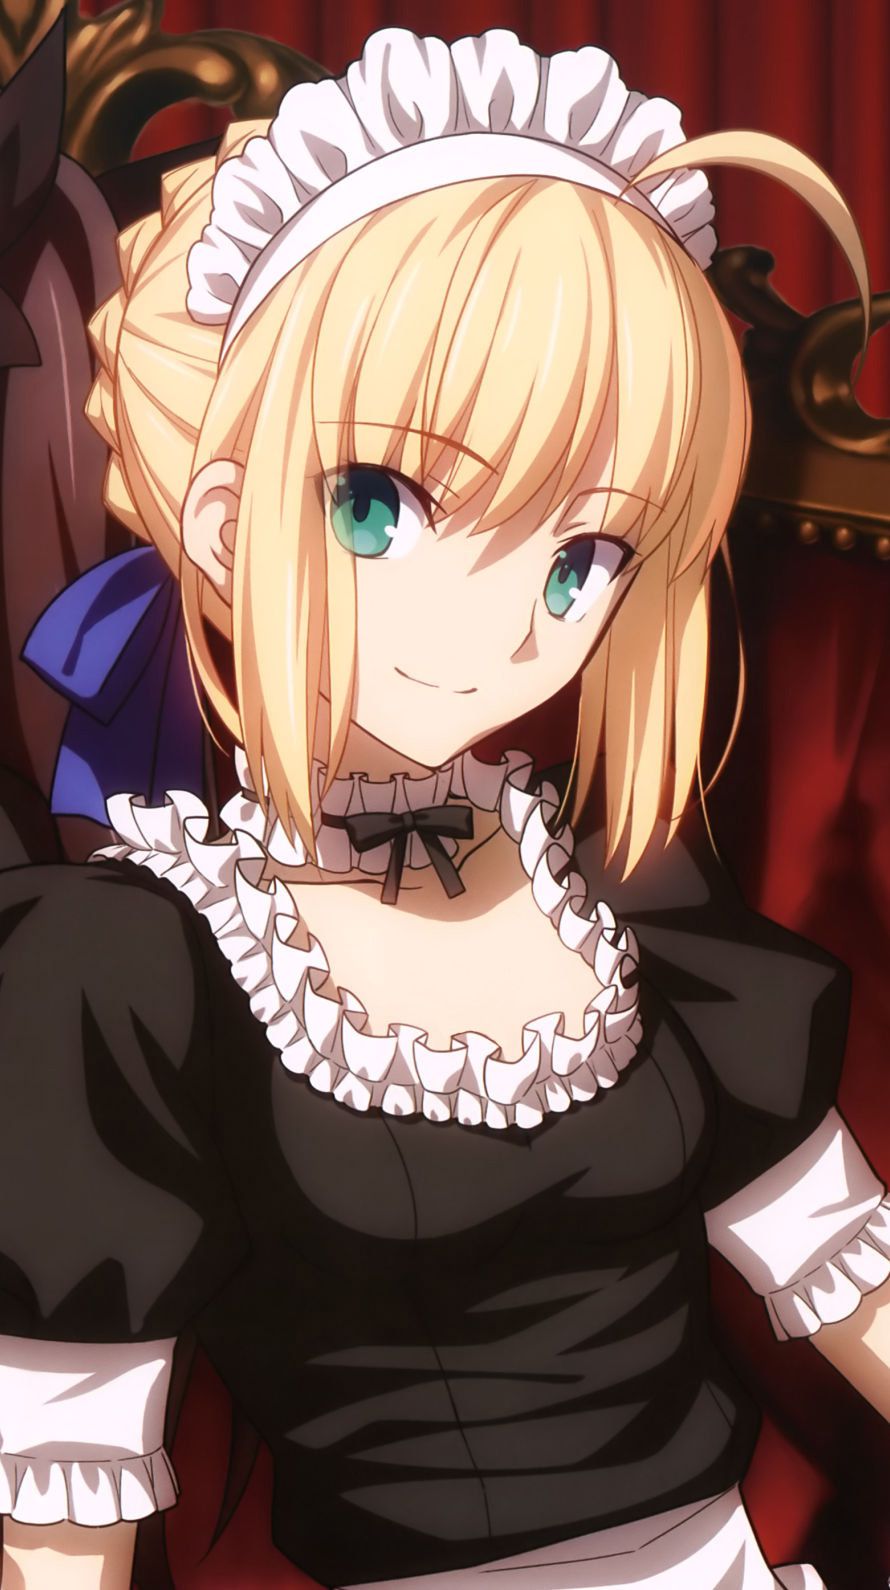 Fate Iphone壁紙画像 Androidスマホ壁紙 8 セイバー Iphone6 Iphone5s アニメ壁紙ネット Pc Android Iphone壁紙 画像